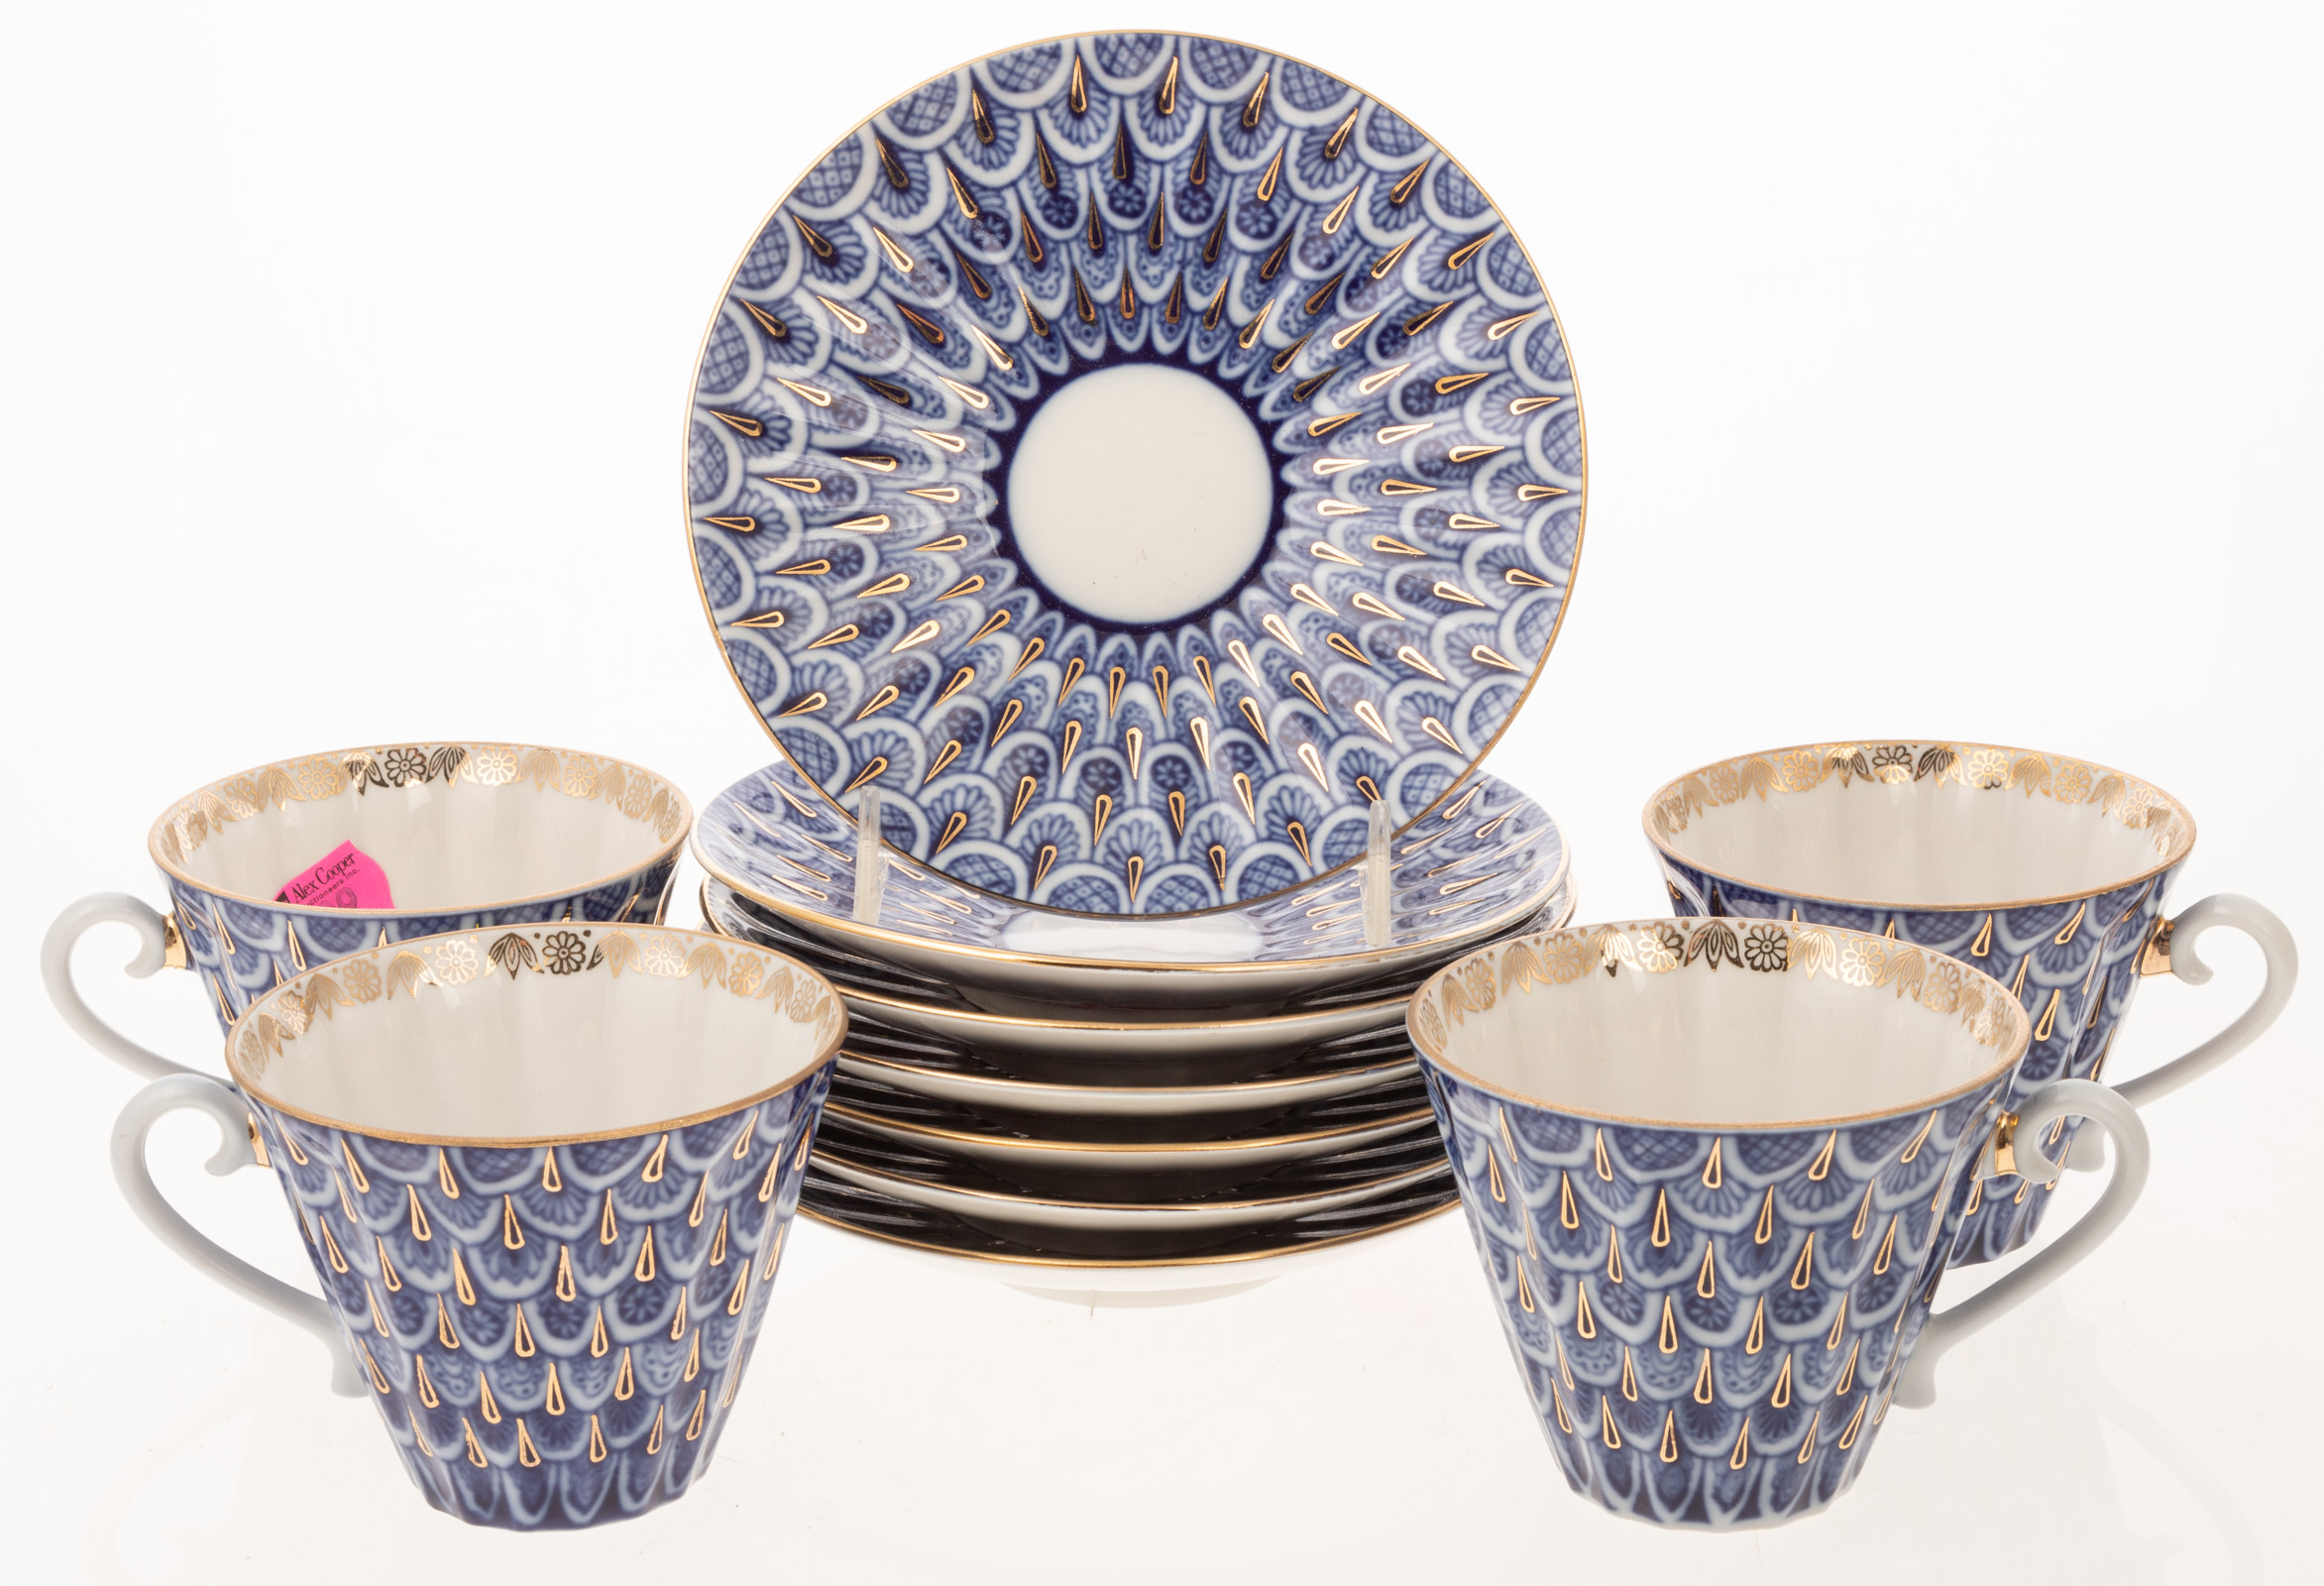 SET OF RUSSIAN TEA CUPS & SAUCERS Complete